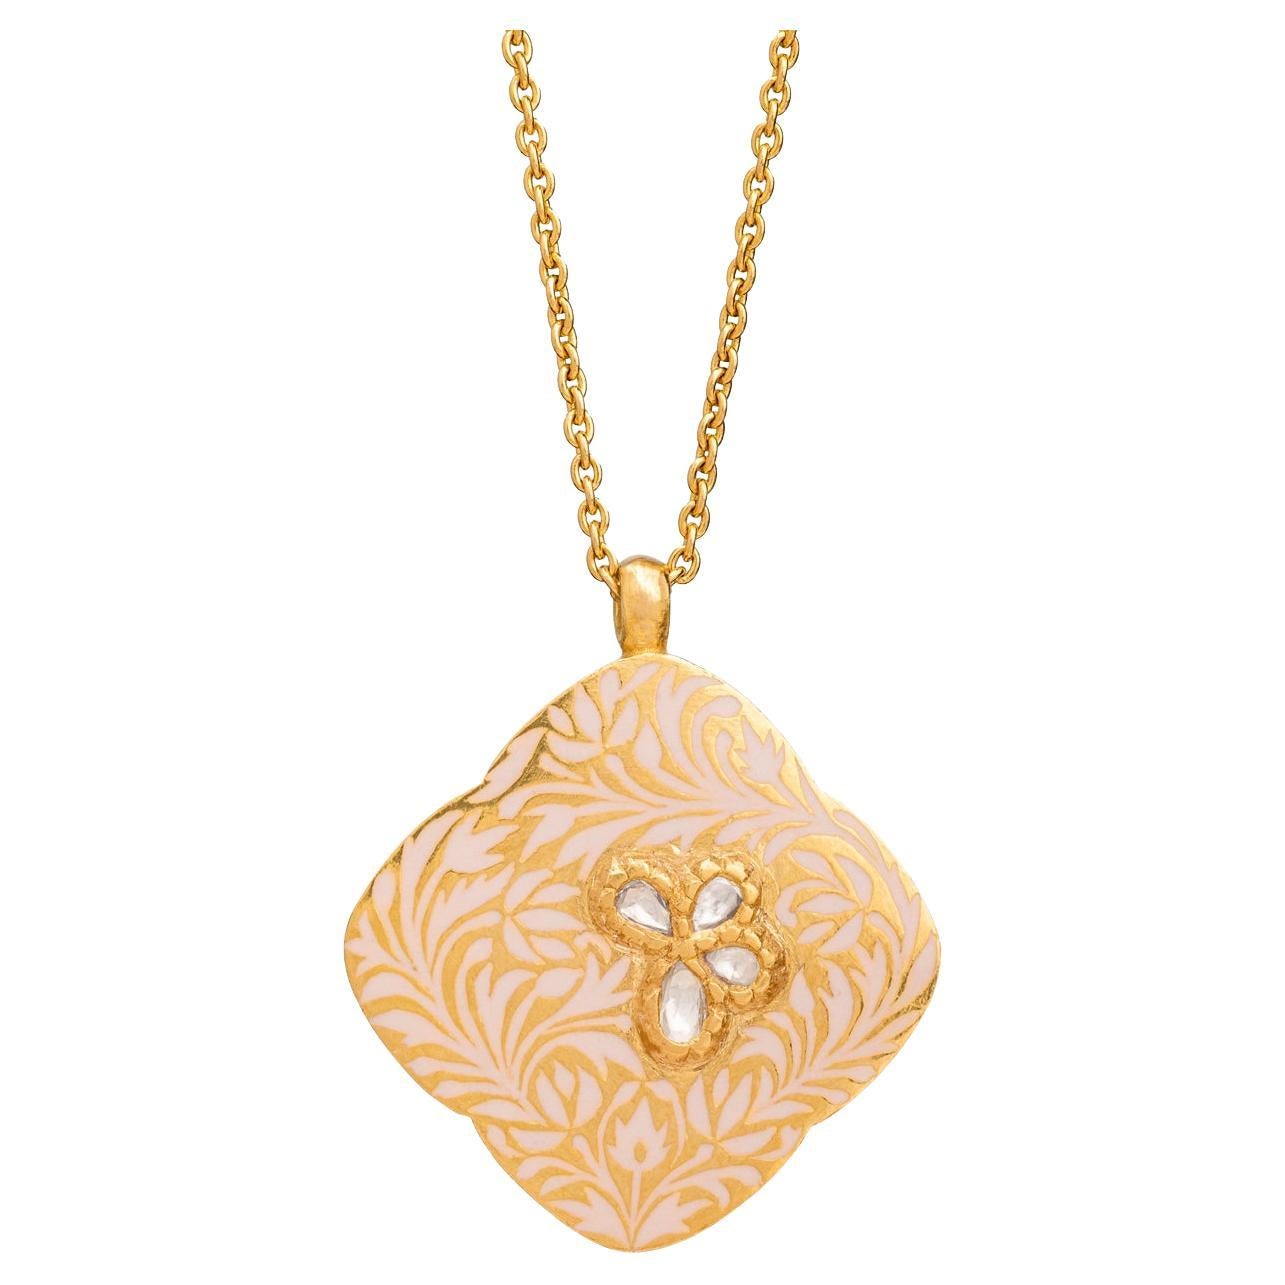 A butterfly in a garden.

This beautifully handcrafted clover pendant necklace called 'Rose Enigma' is from Agaro Jewels' Roya collection. Roya, meaning 'dreams' in Persian, is a collection of reversible pendants that are modern heirlooms made with